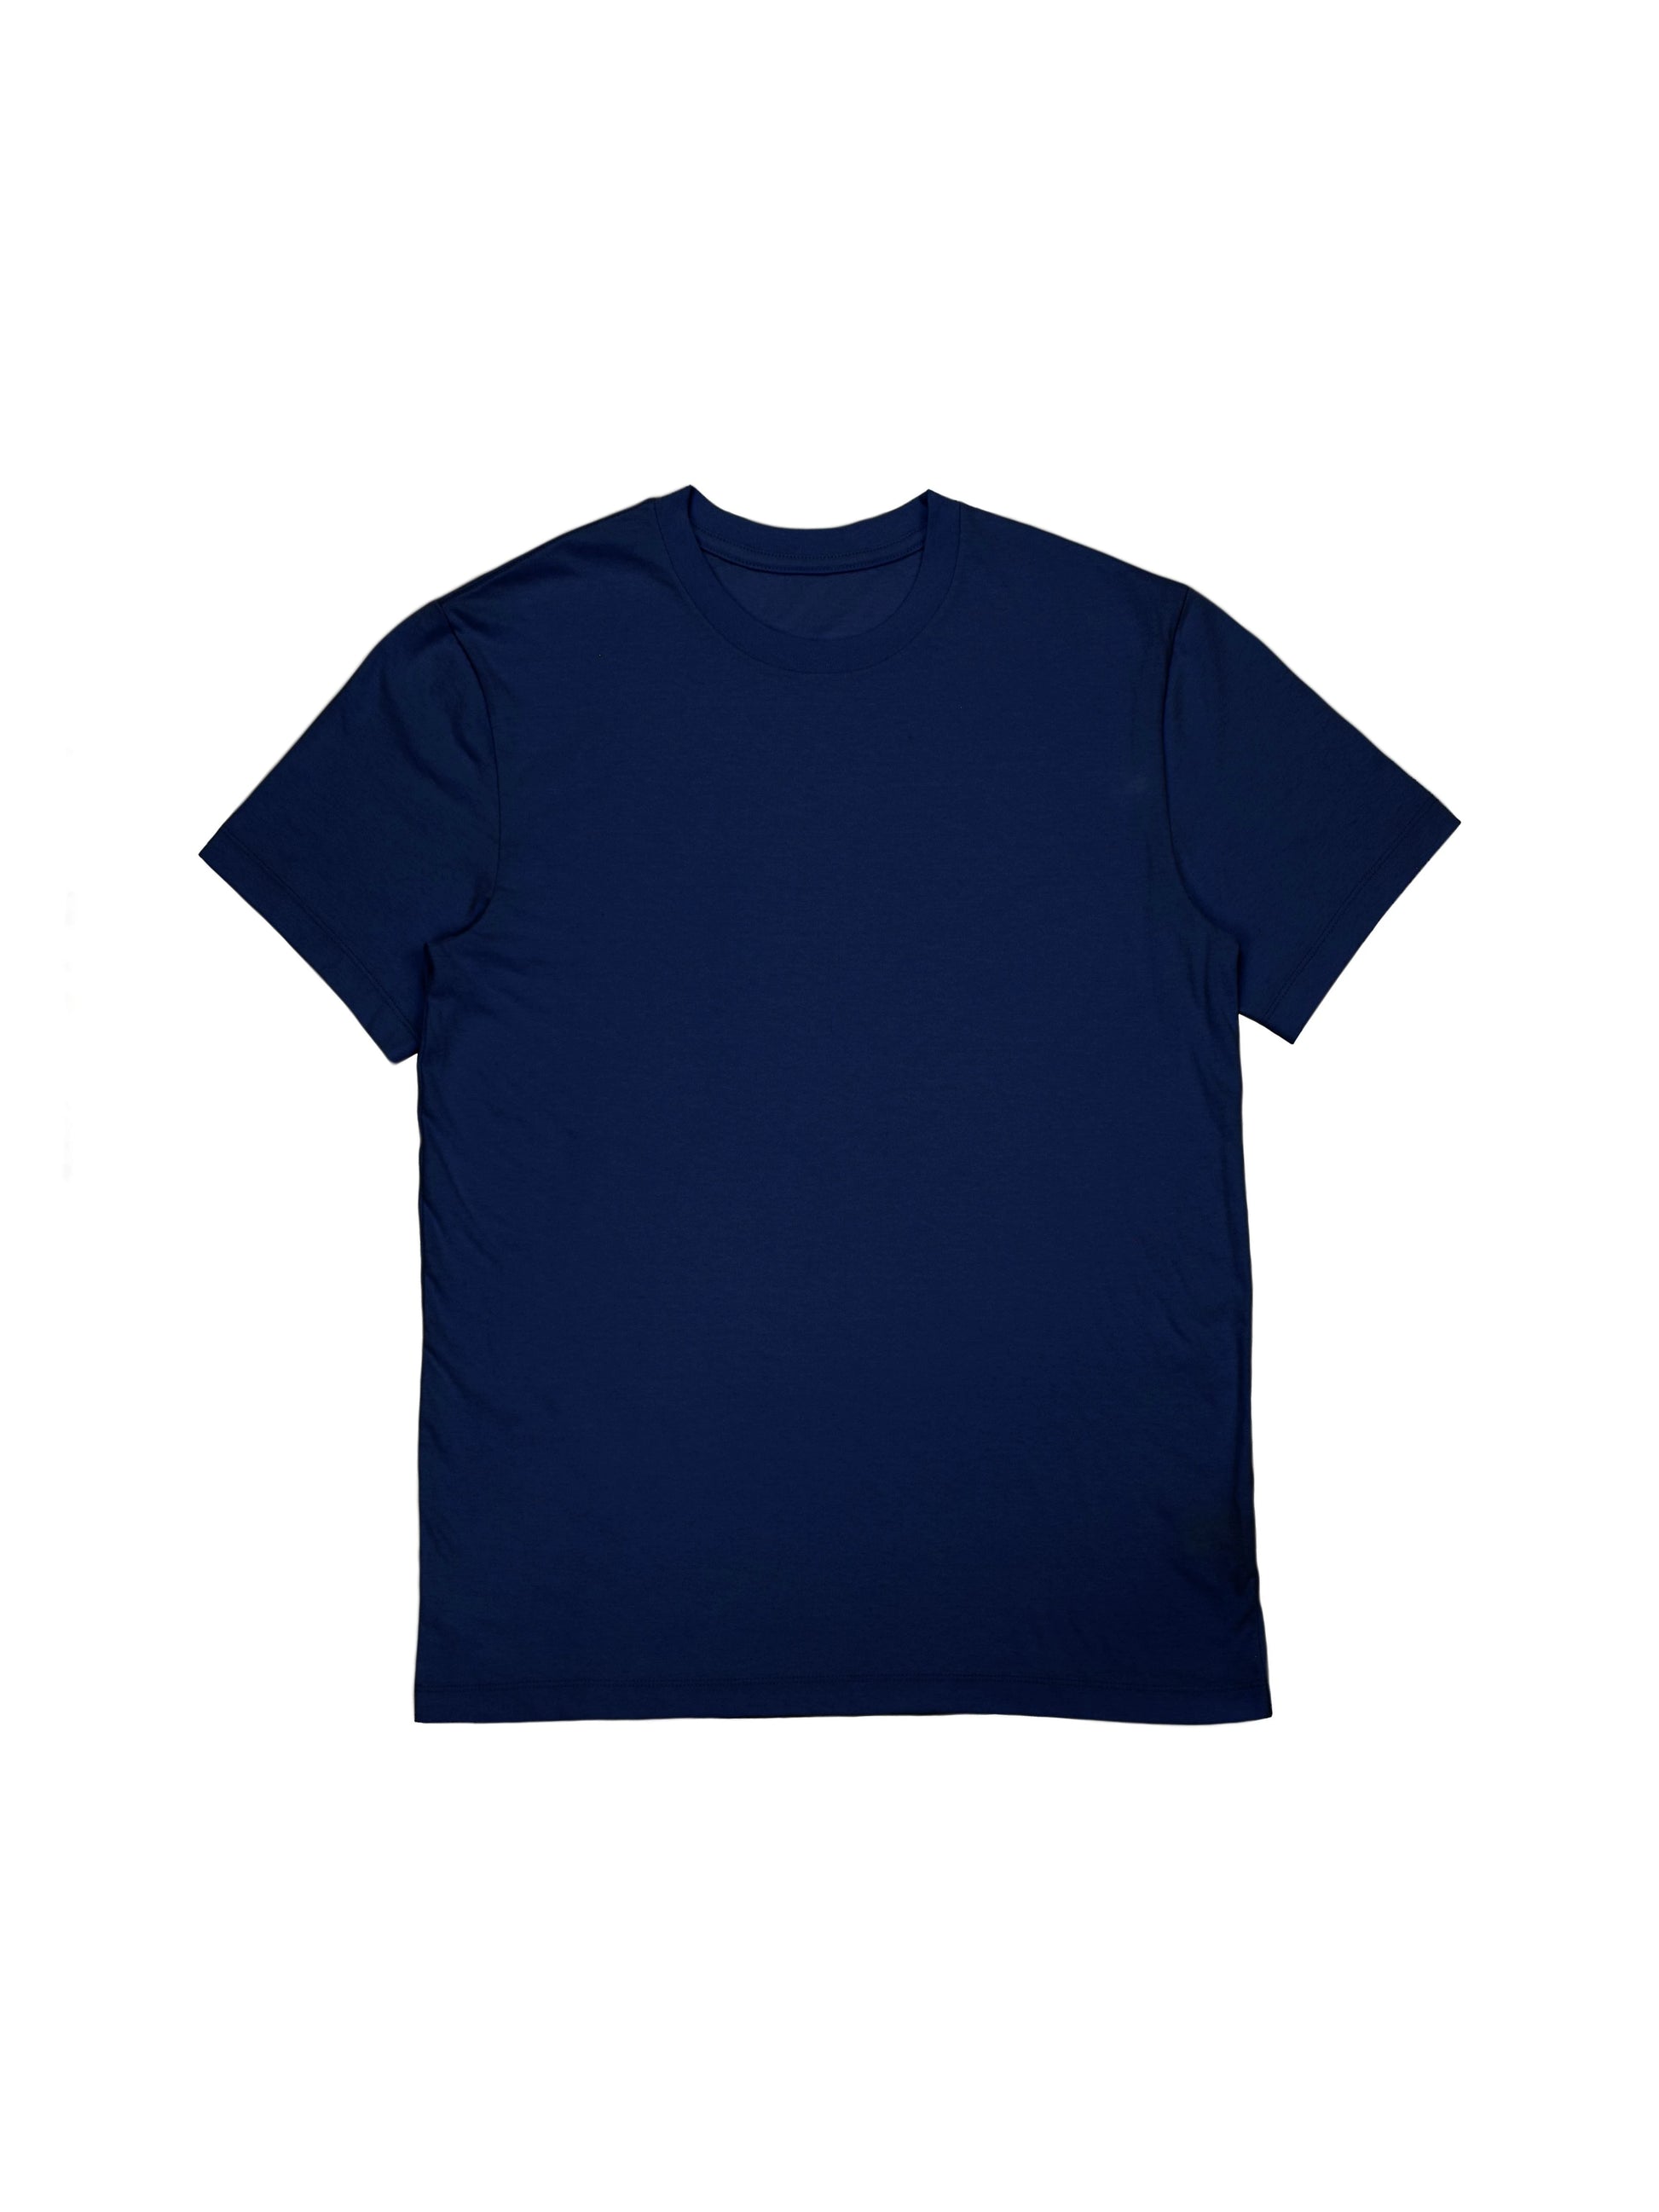 Boxy Fit Navy Blue T-Shirt - 100% Organic Cotton Made In Canada – Gabe  Clothing